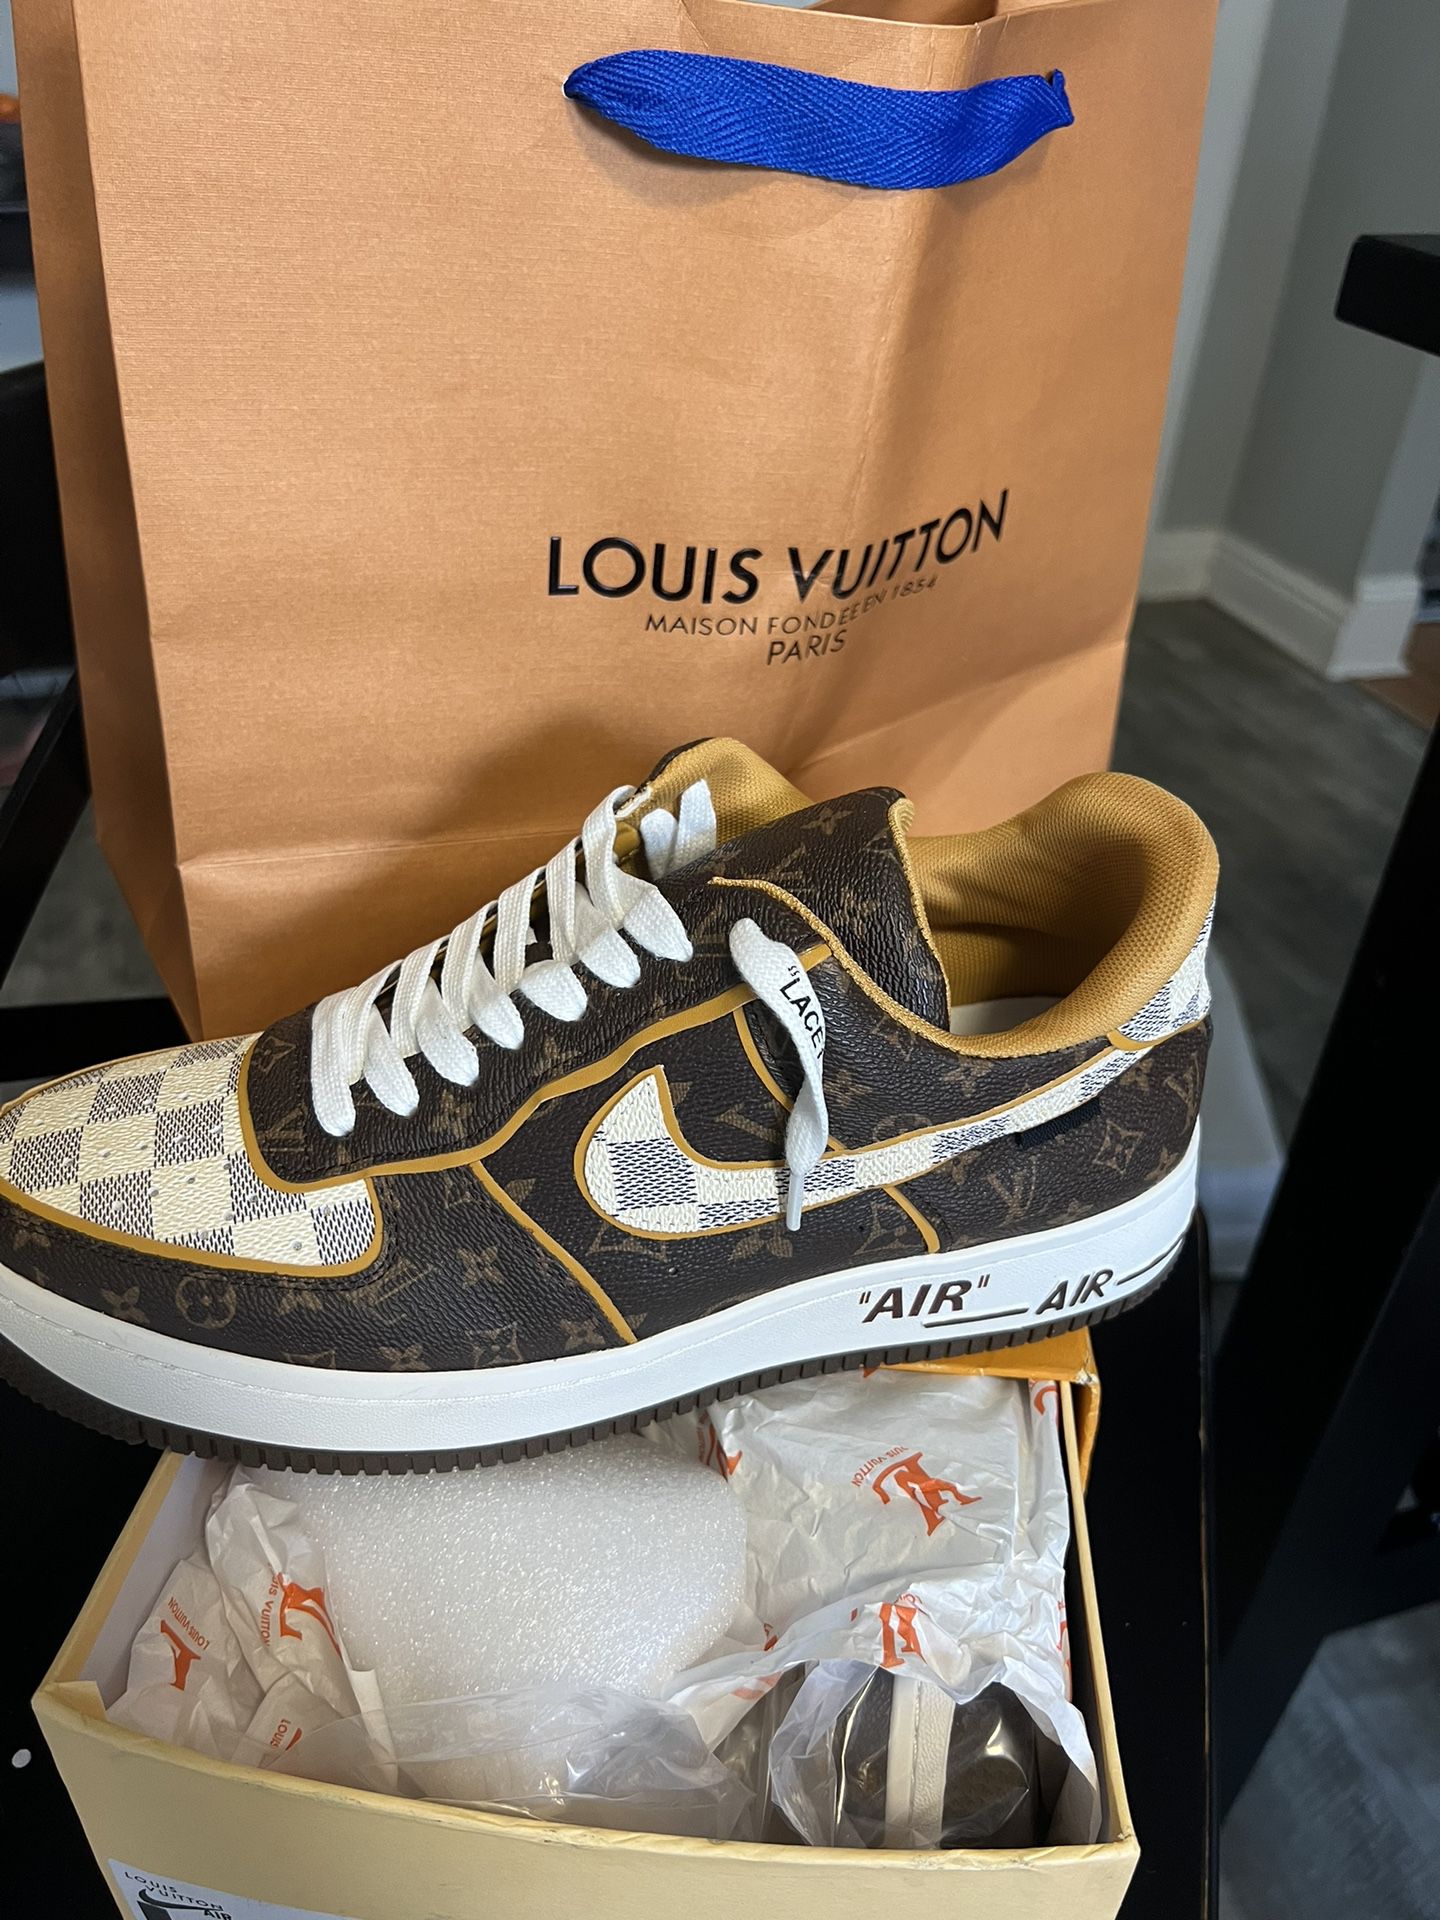 Louis Vuitton Sneakers for Sale in Teaneck, NJ - OfferUp